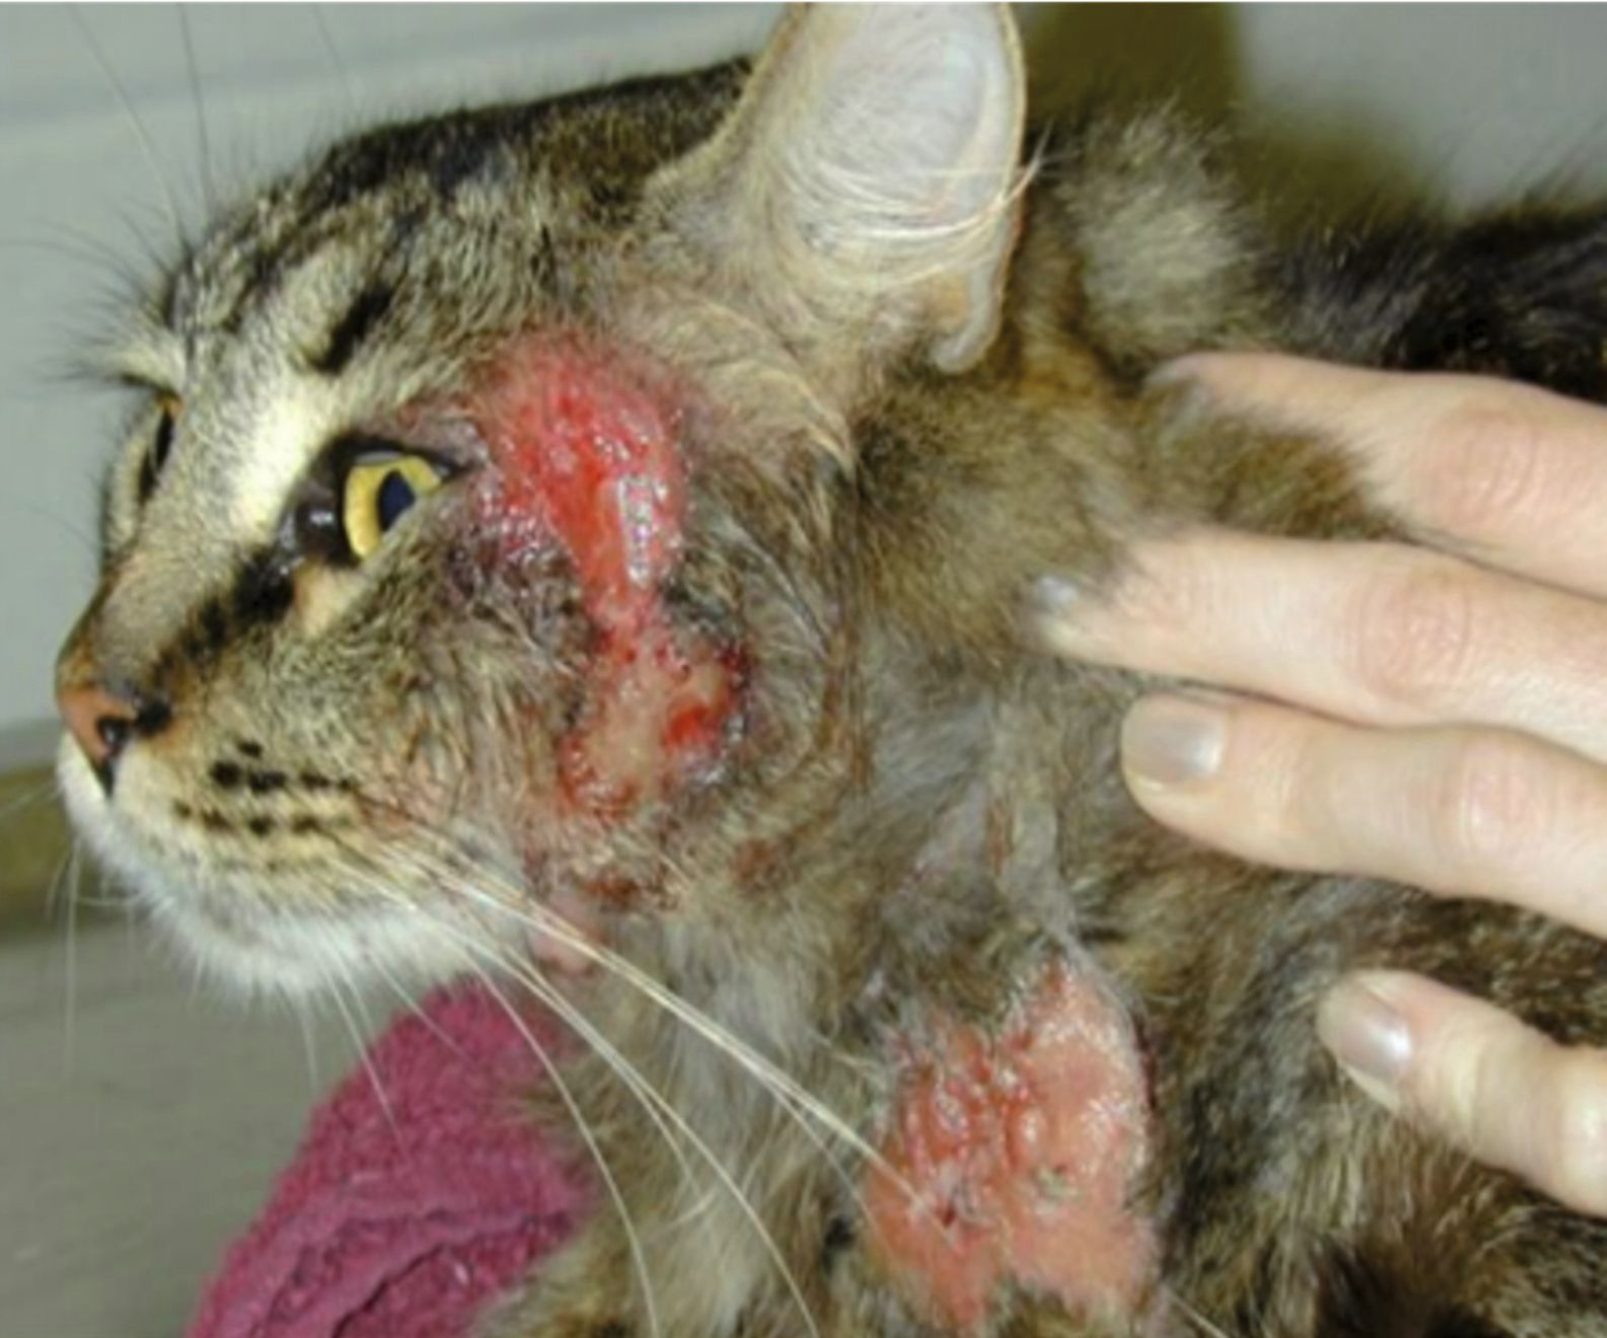 Head and neck excoriations in a cat with AD